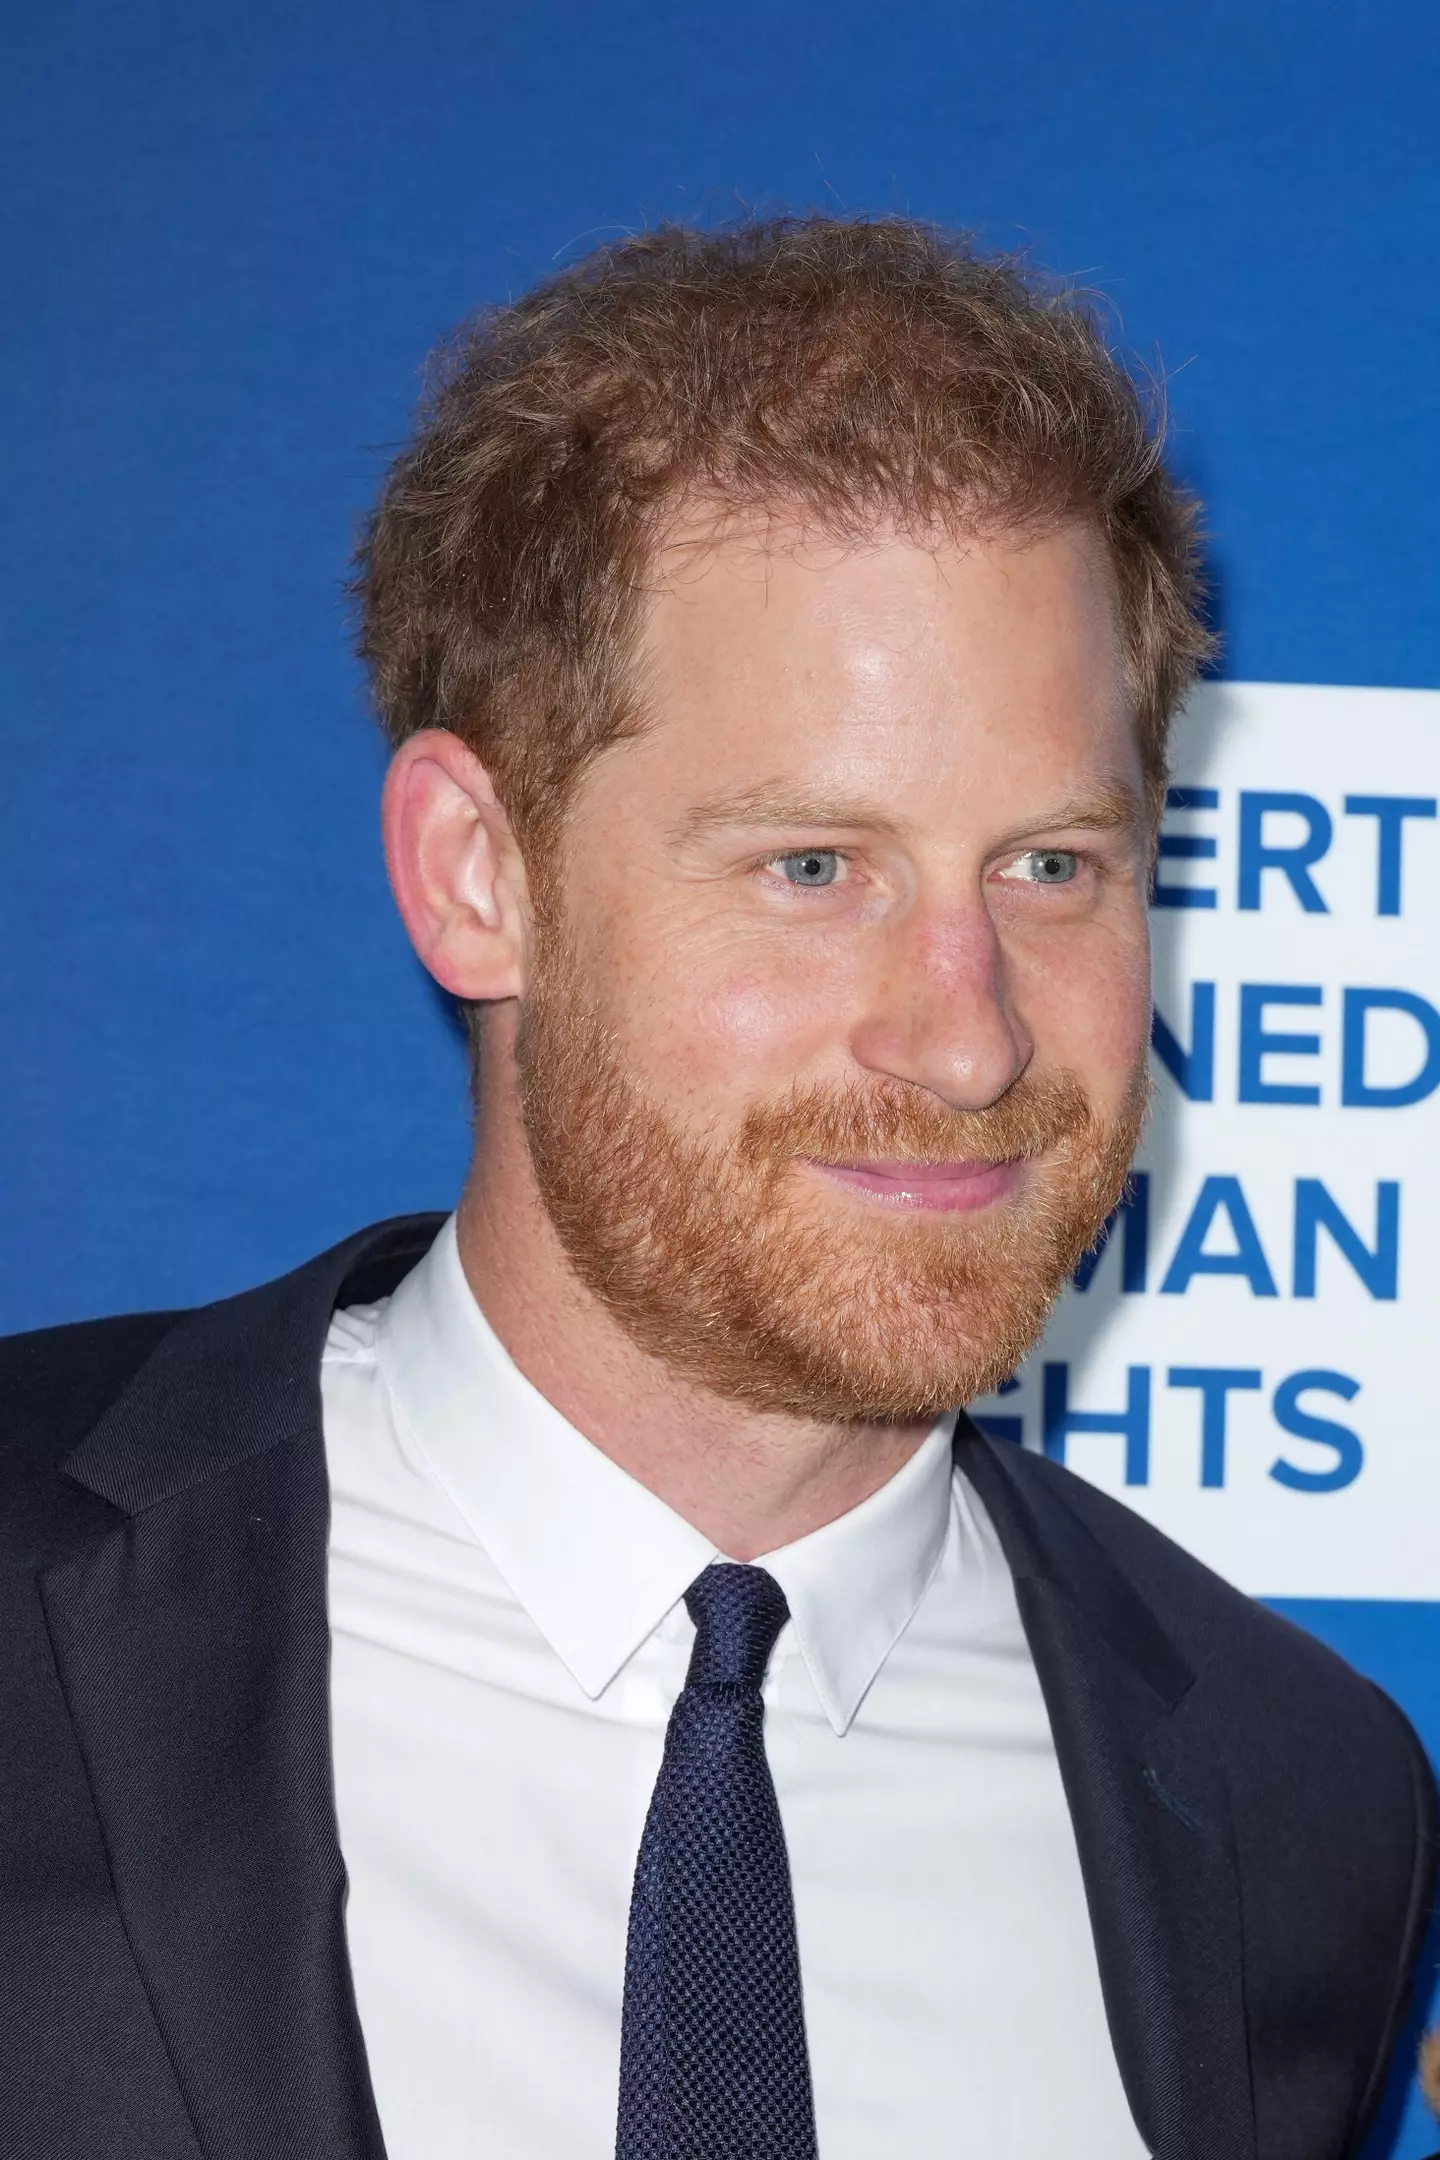 Prince Harry was asked by one reporter if he was putting money before family.